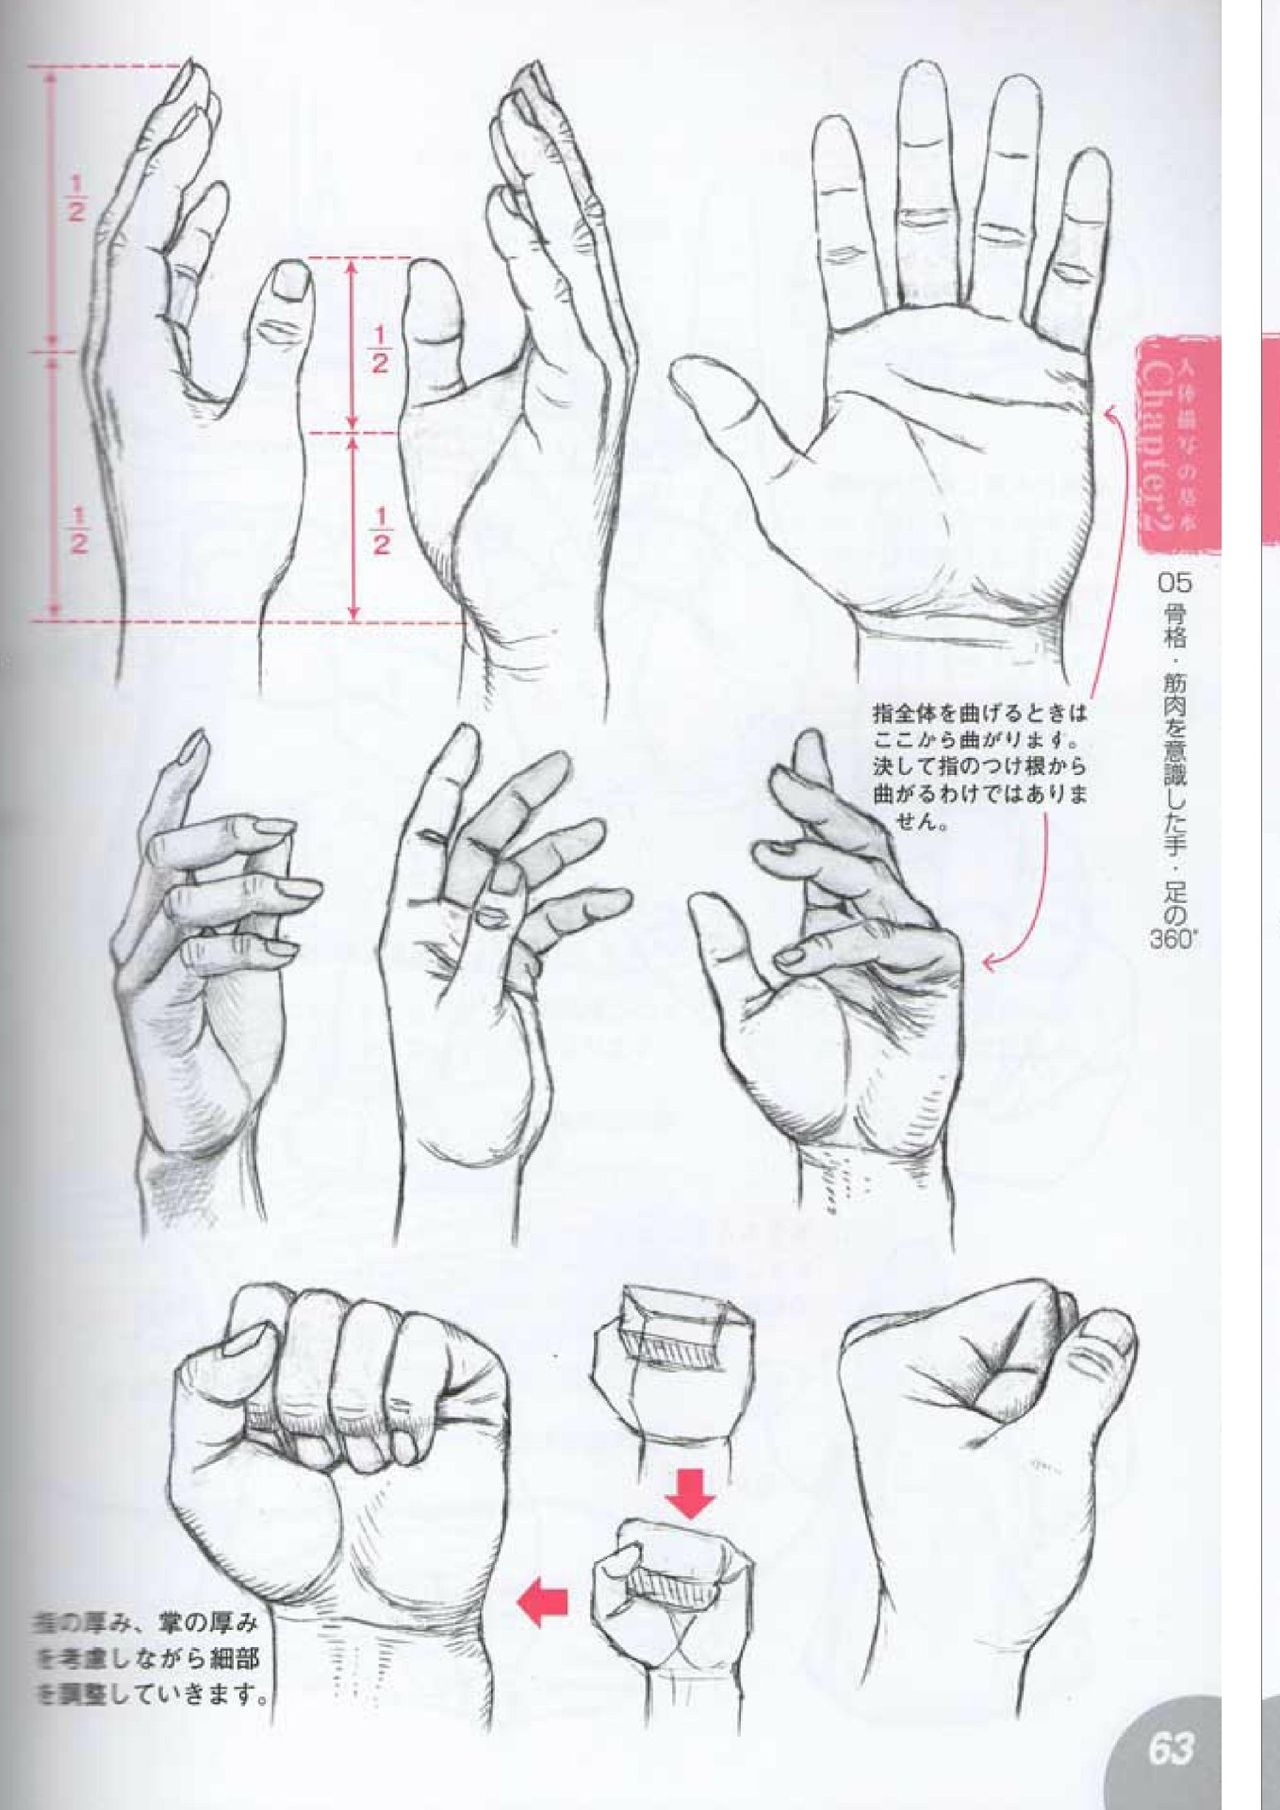 How to draw a character drawing from a human anatomical chart 61